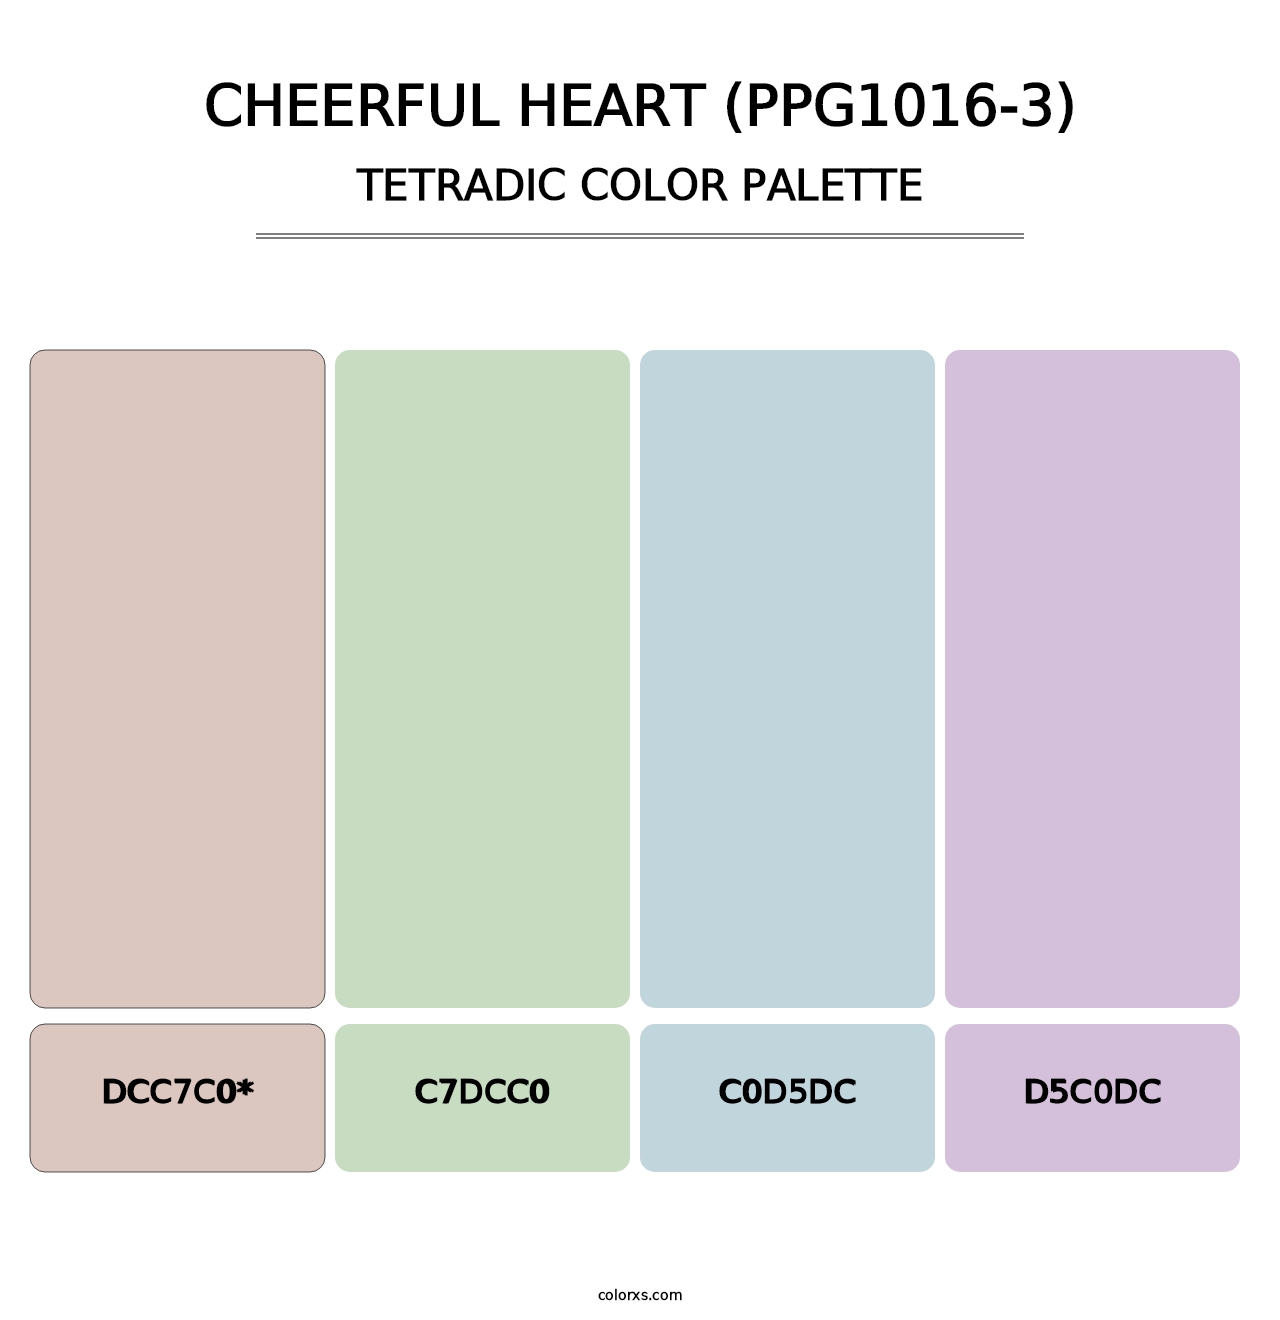 Cheerful Heart (PPG1016-3) - Tetradic Color Palette